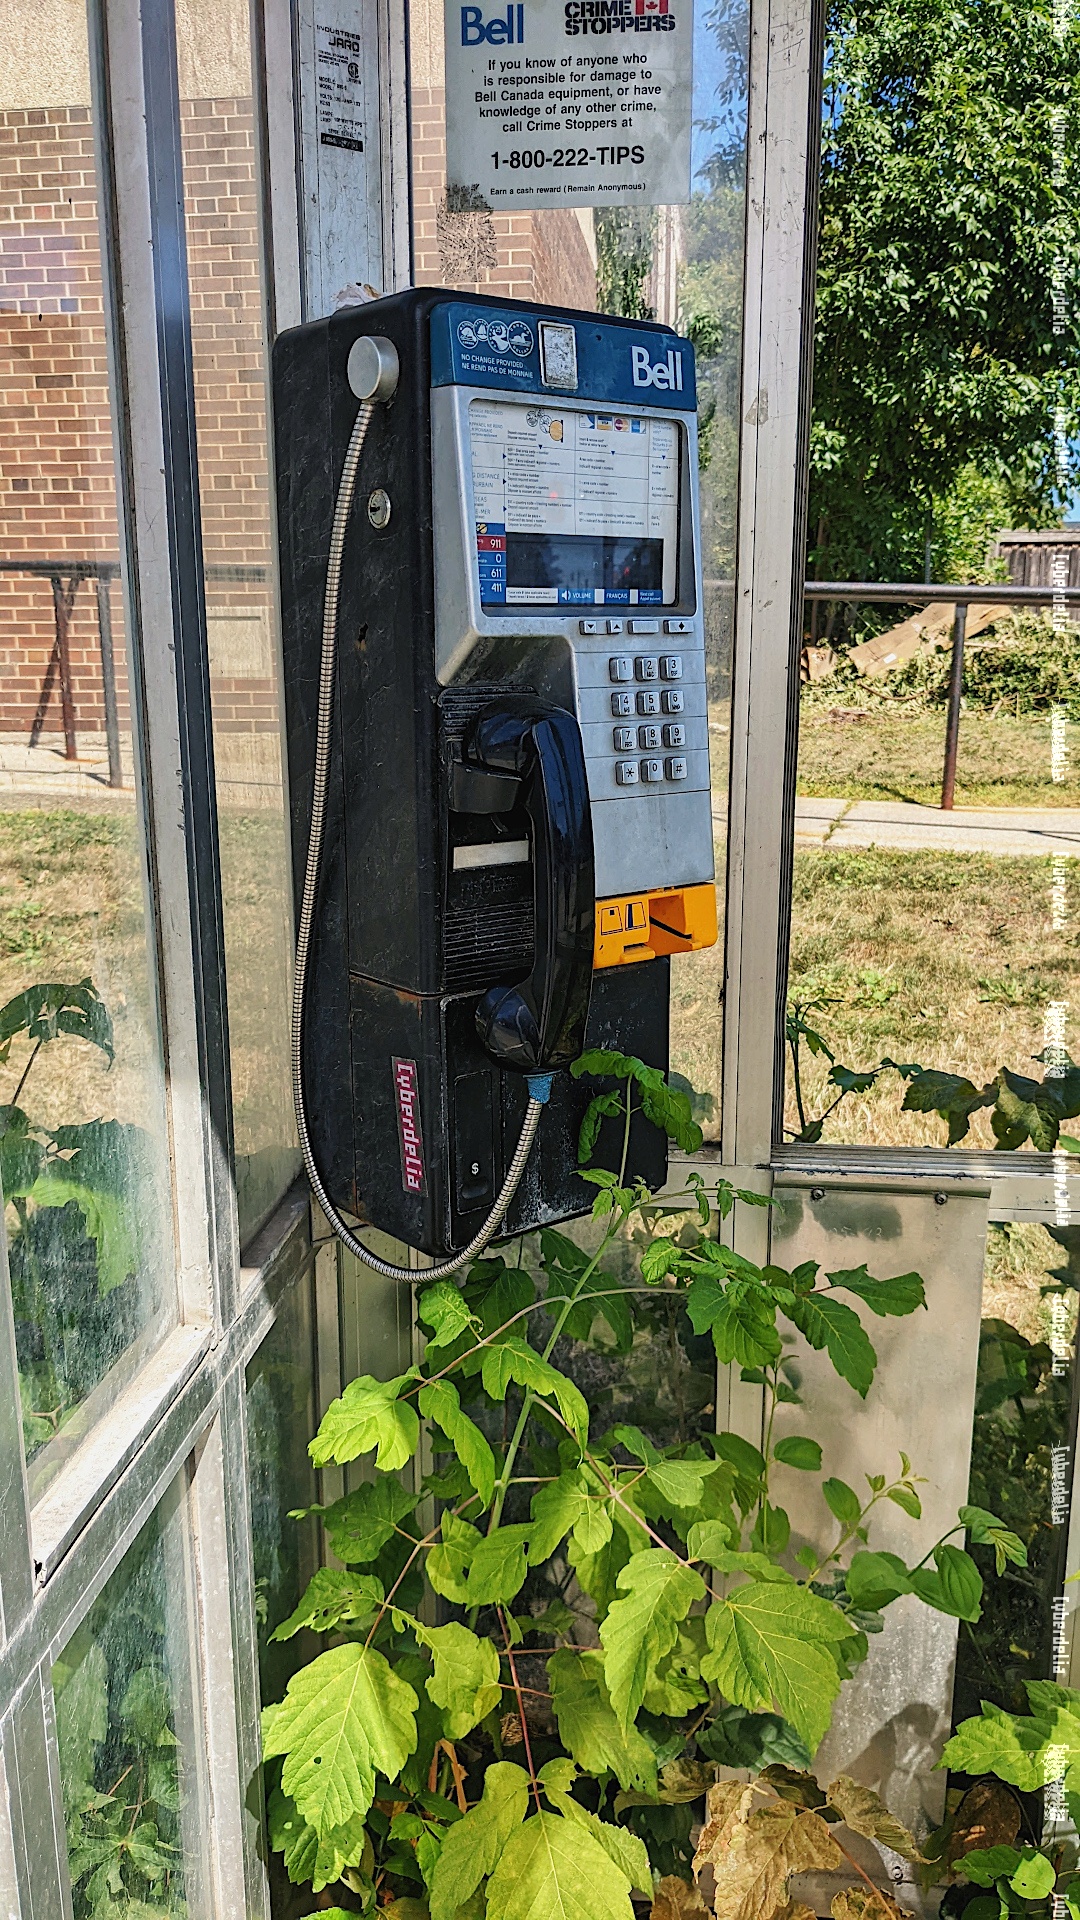 A Bell Canada payphone inside a phonebooth, blue plastic top coin deposit, black body and receiver and yellow phonecard slot. It's got some dust and mud marks, not clean. Has a Cyberdelia sticker on its side. A number of green weeds/plants have overgrown into the booth and are creeping up to the base of the mounted phone. A sign above says Bell Crime Stoppers with a Canadian flag. Text: If you know of anyone who is responsible for damage to Bell Canada equipment, or have knowledge of any other crime, call Crime Stoppers at 1-800-222-TIPS. A tree and grass and edge of a brown brick building can be seen in distance behind the booth.